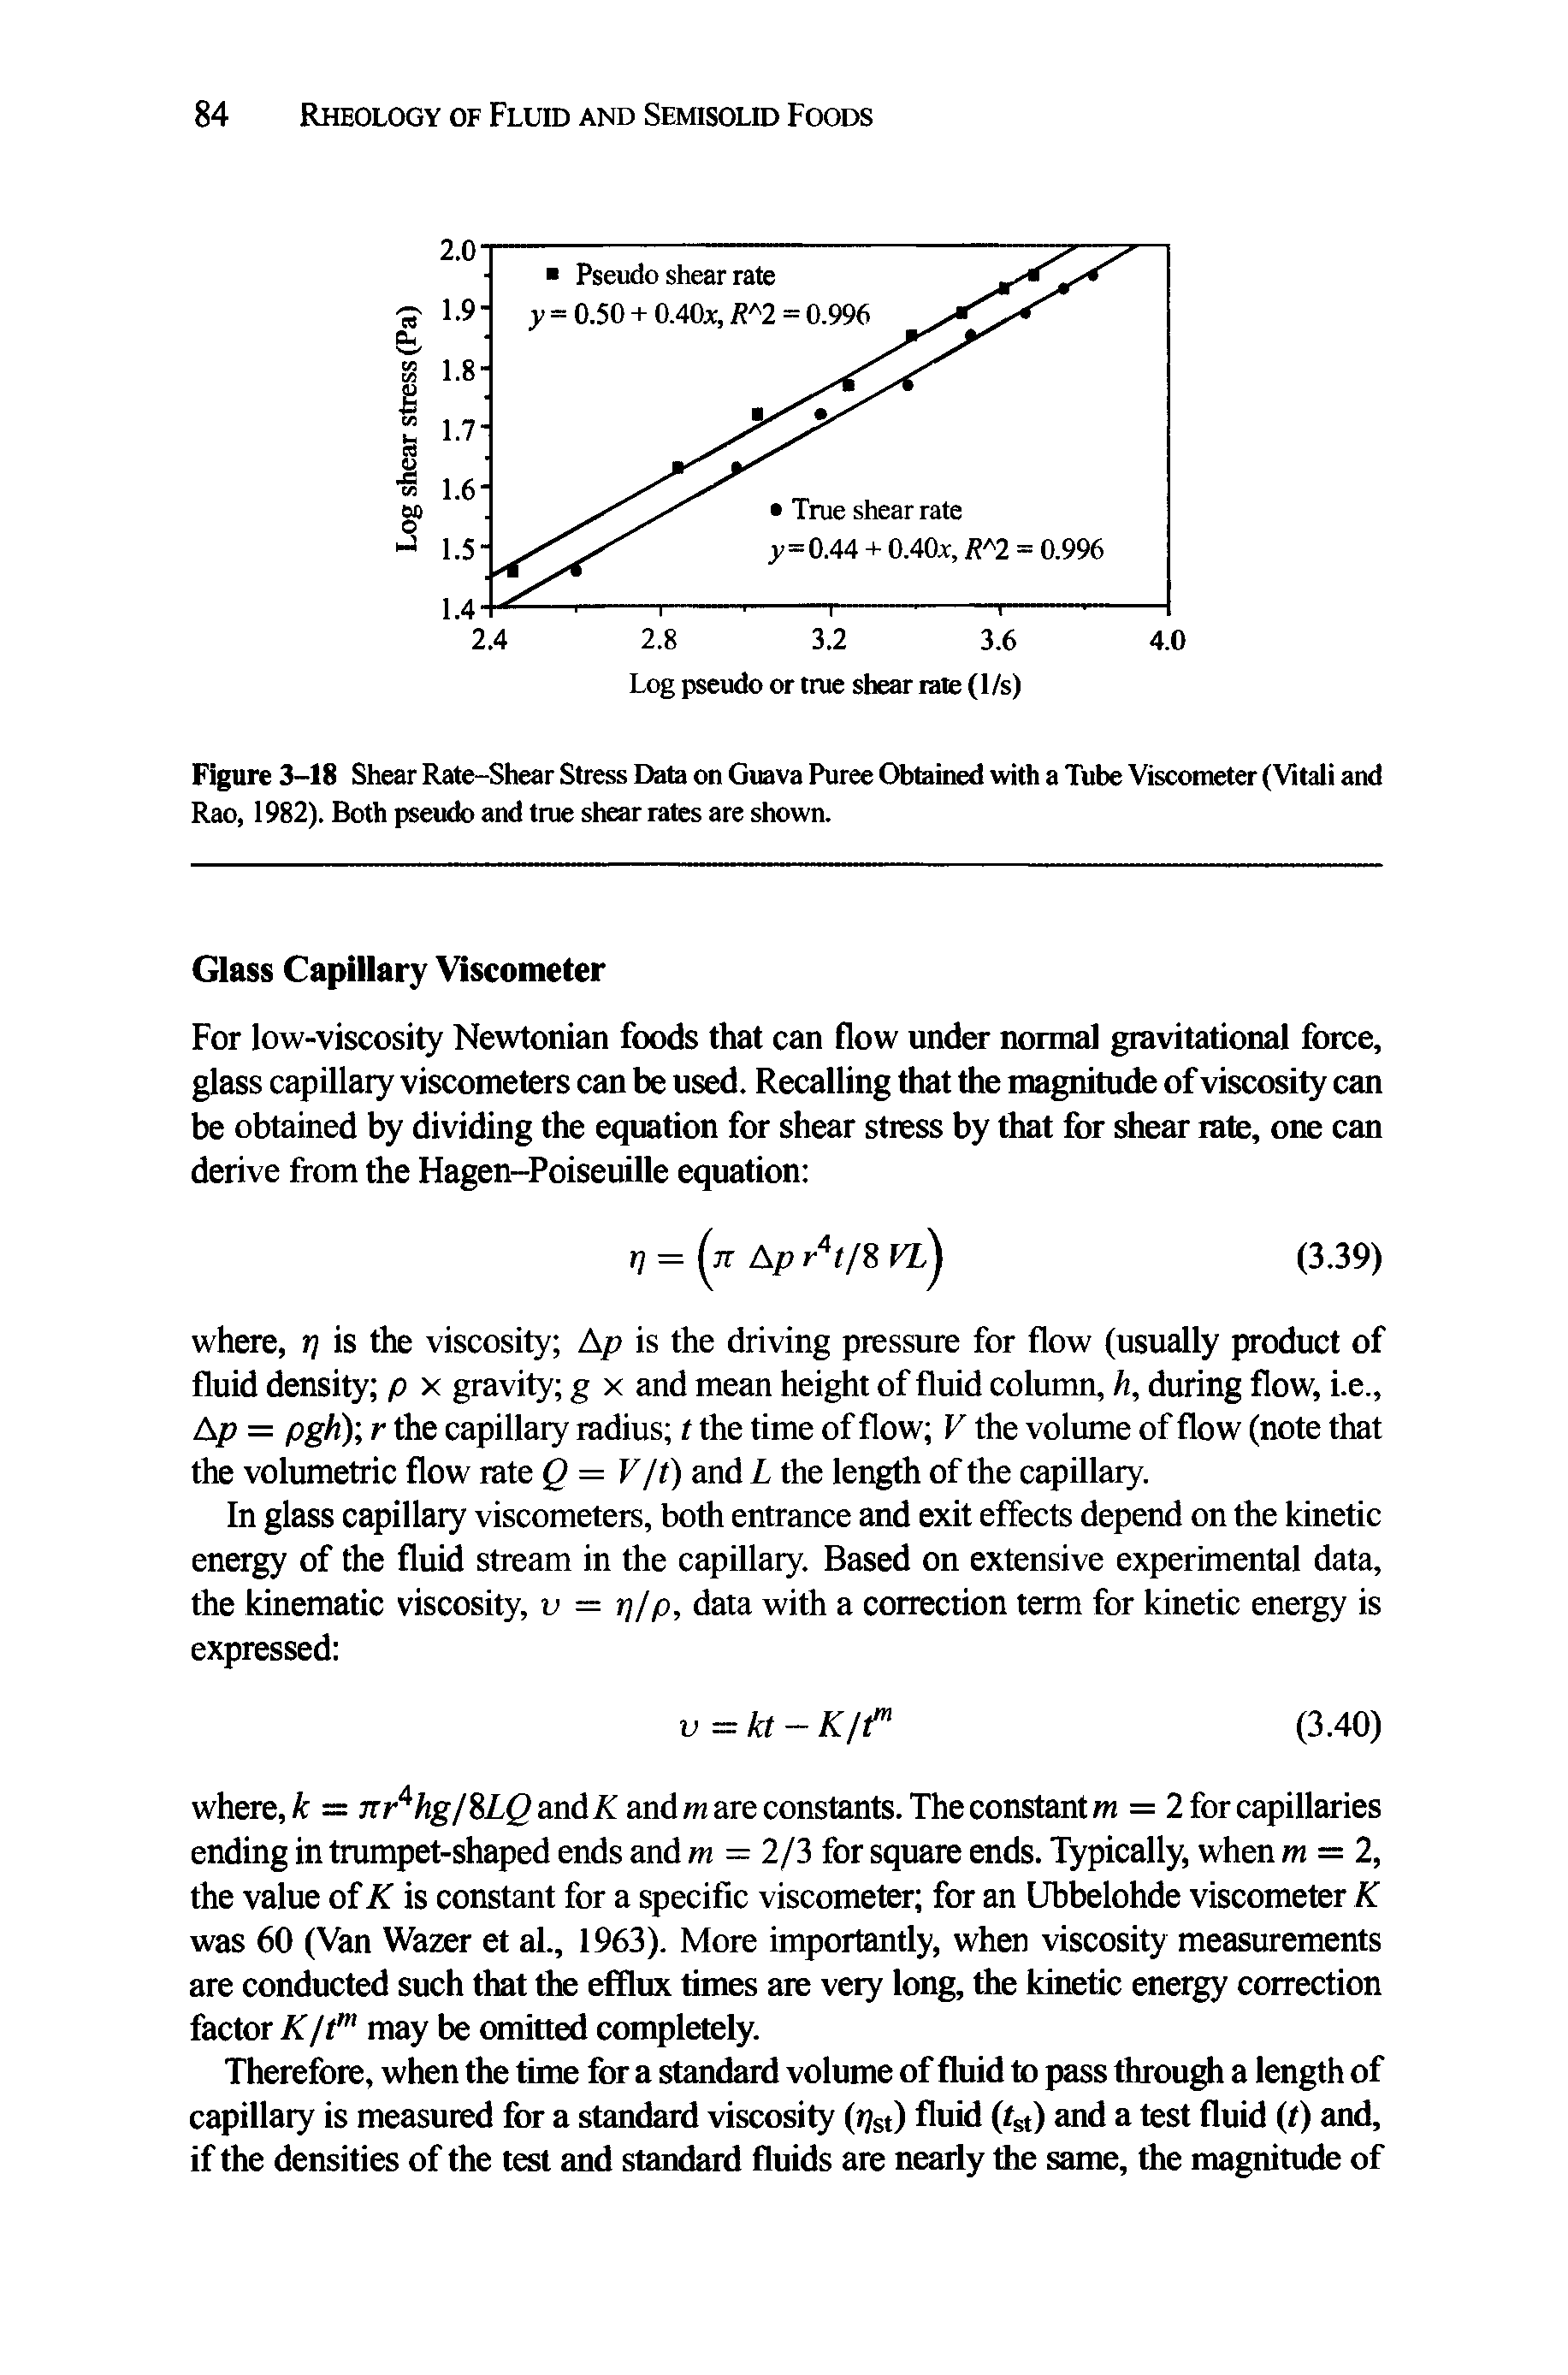 Figure 3-18 Shear Rate-Shear Stress Data on Guava Puree Obtained with a Tube Viscometer (Vitaii and Rao, 1982). Both pseudo and true shear rates are shown.